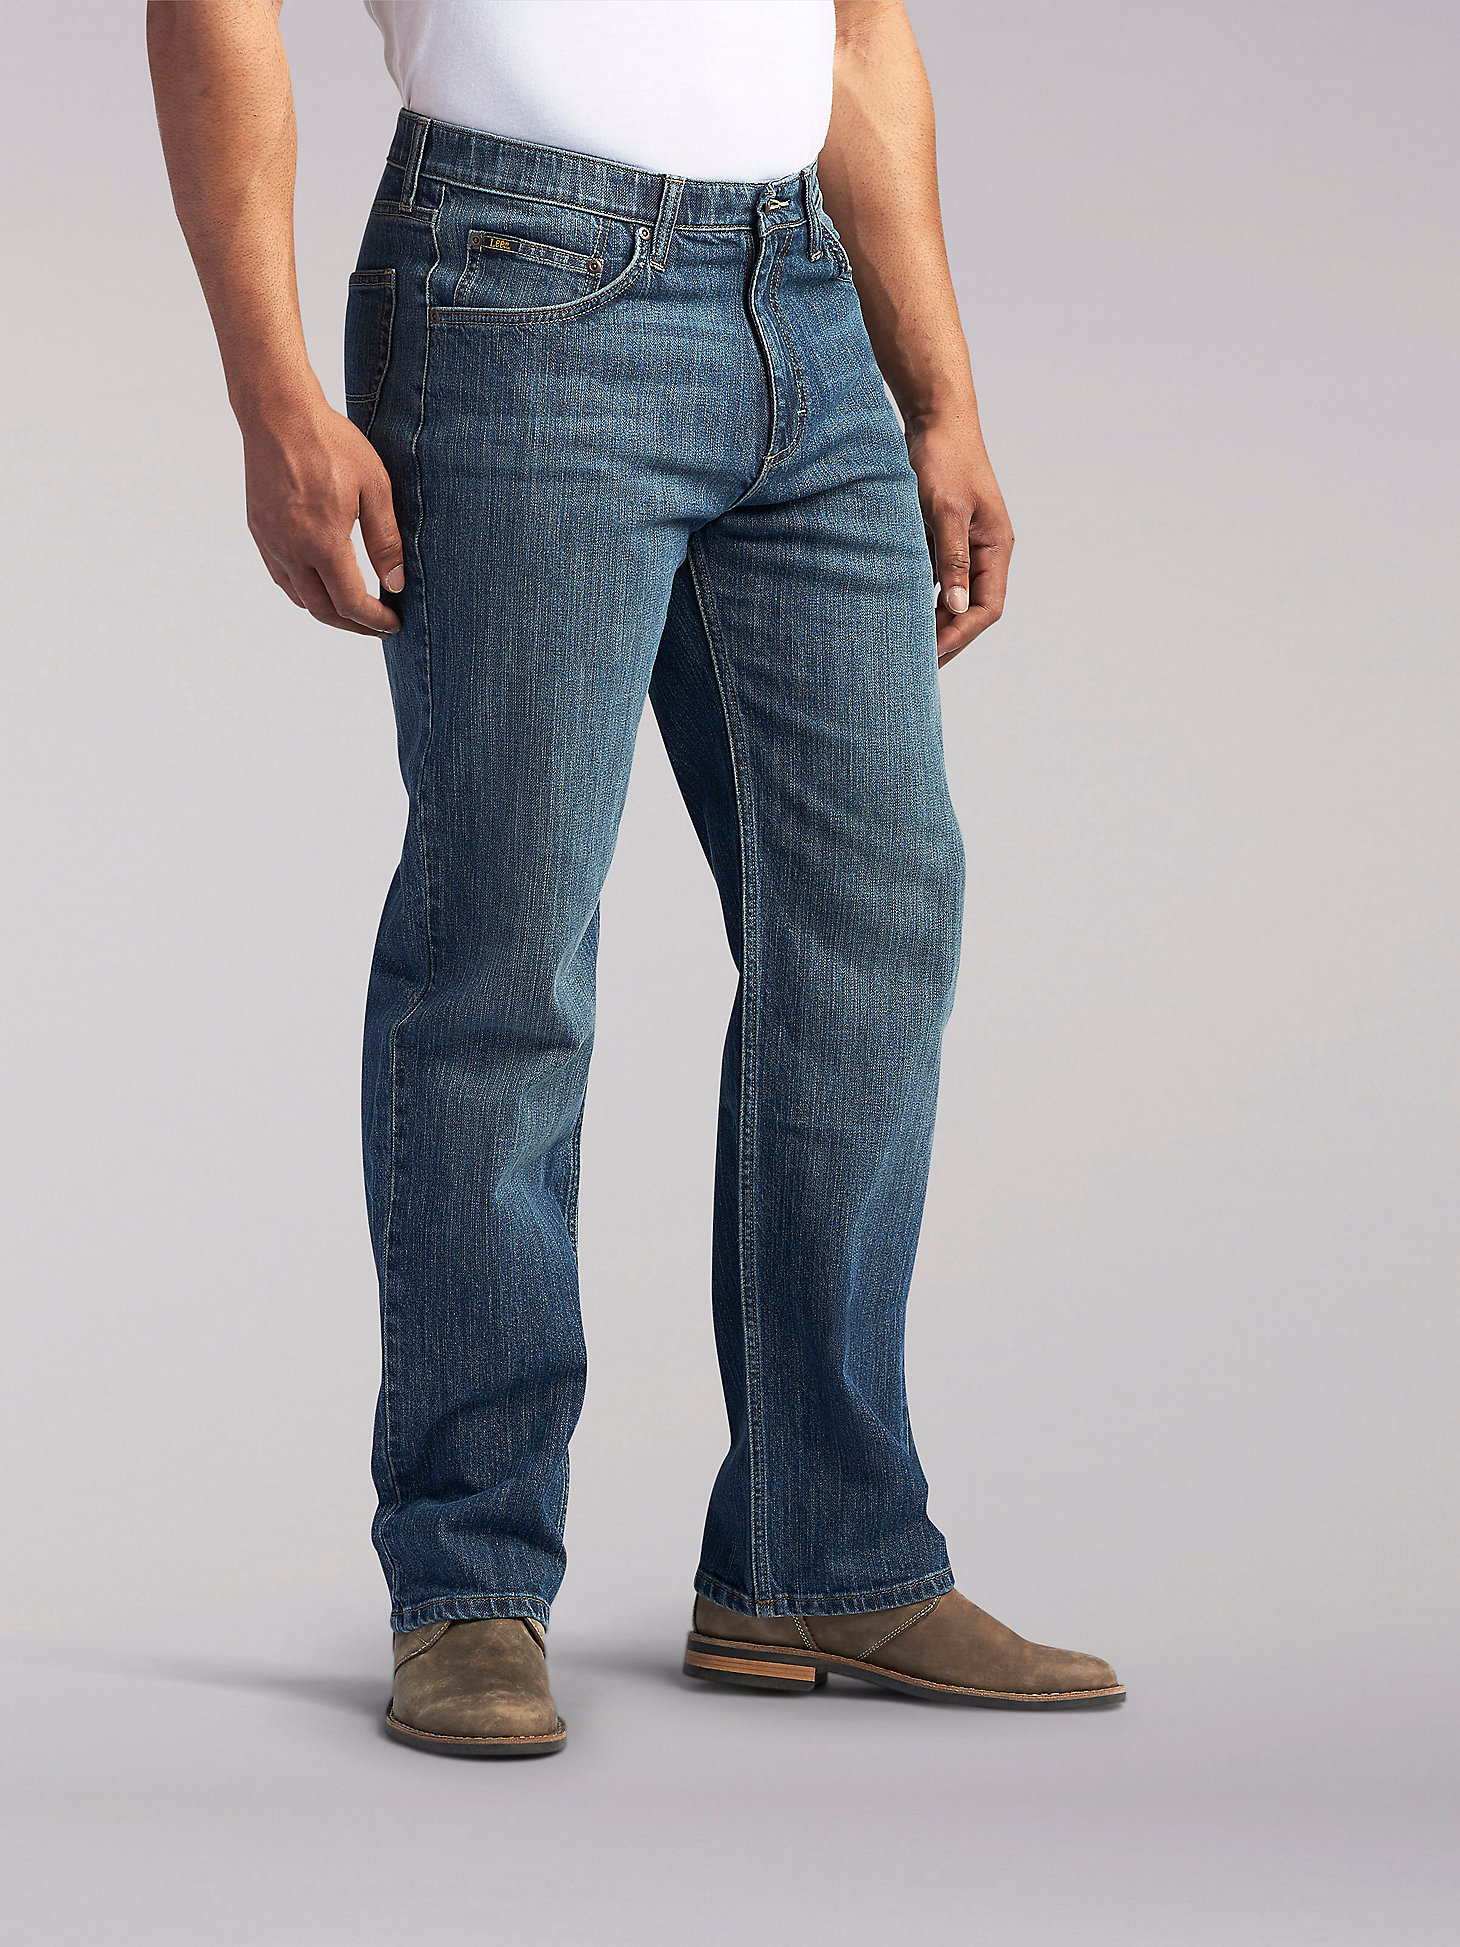 Men’s Premium Select Relaxed Fit Straight Leg Jean (Big&Tall) in Thatch main view